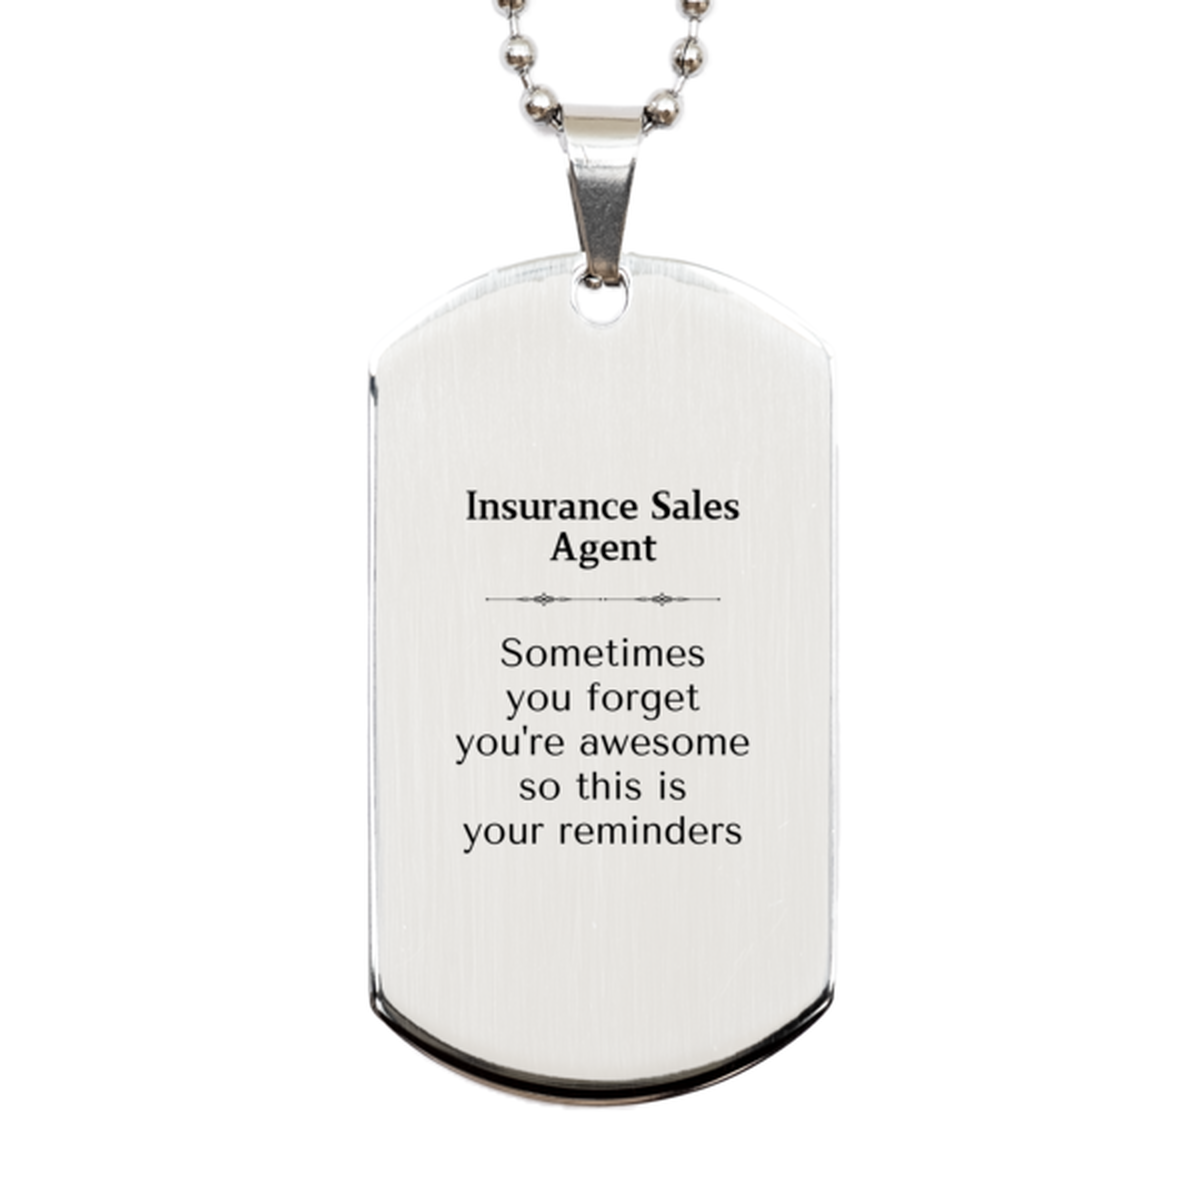 Sentimental Insurance Sales Agent Silver Dog Tag, Insurance Sales Agent Sometimes you forget you're awesome so this is your reminders, Graduation Christmas Birthday Gifts for Insurance Sales Agent, Men, Women, Coworkers